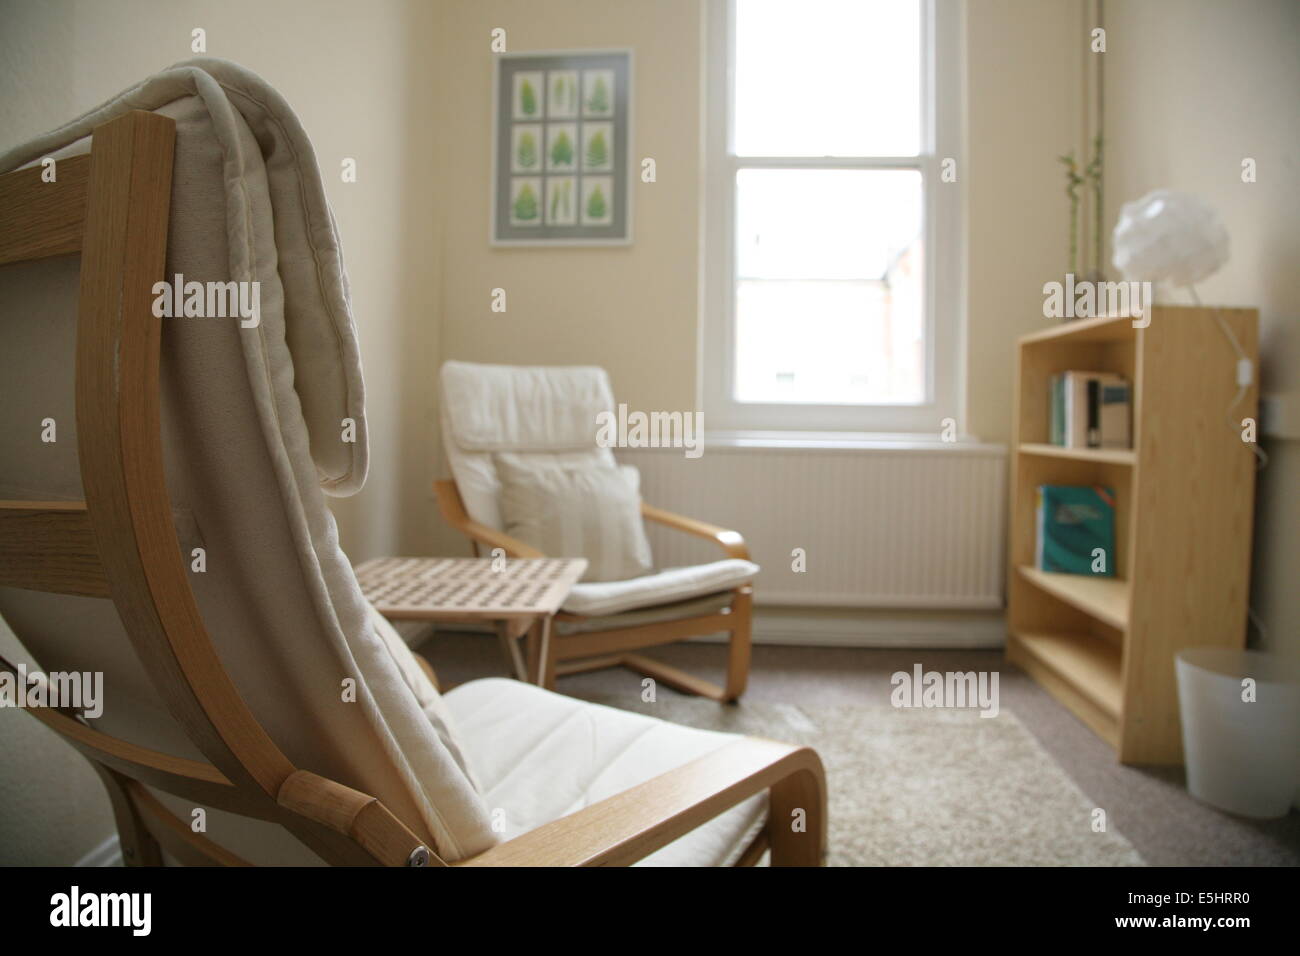 Counselling room Stock Photo